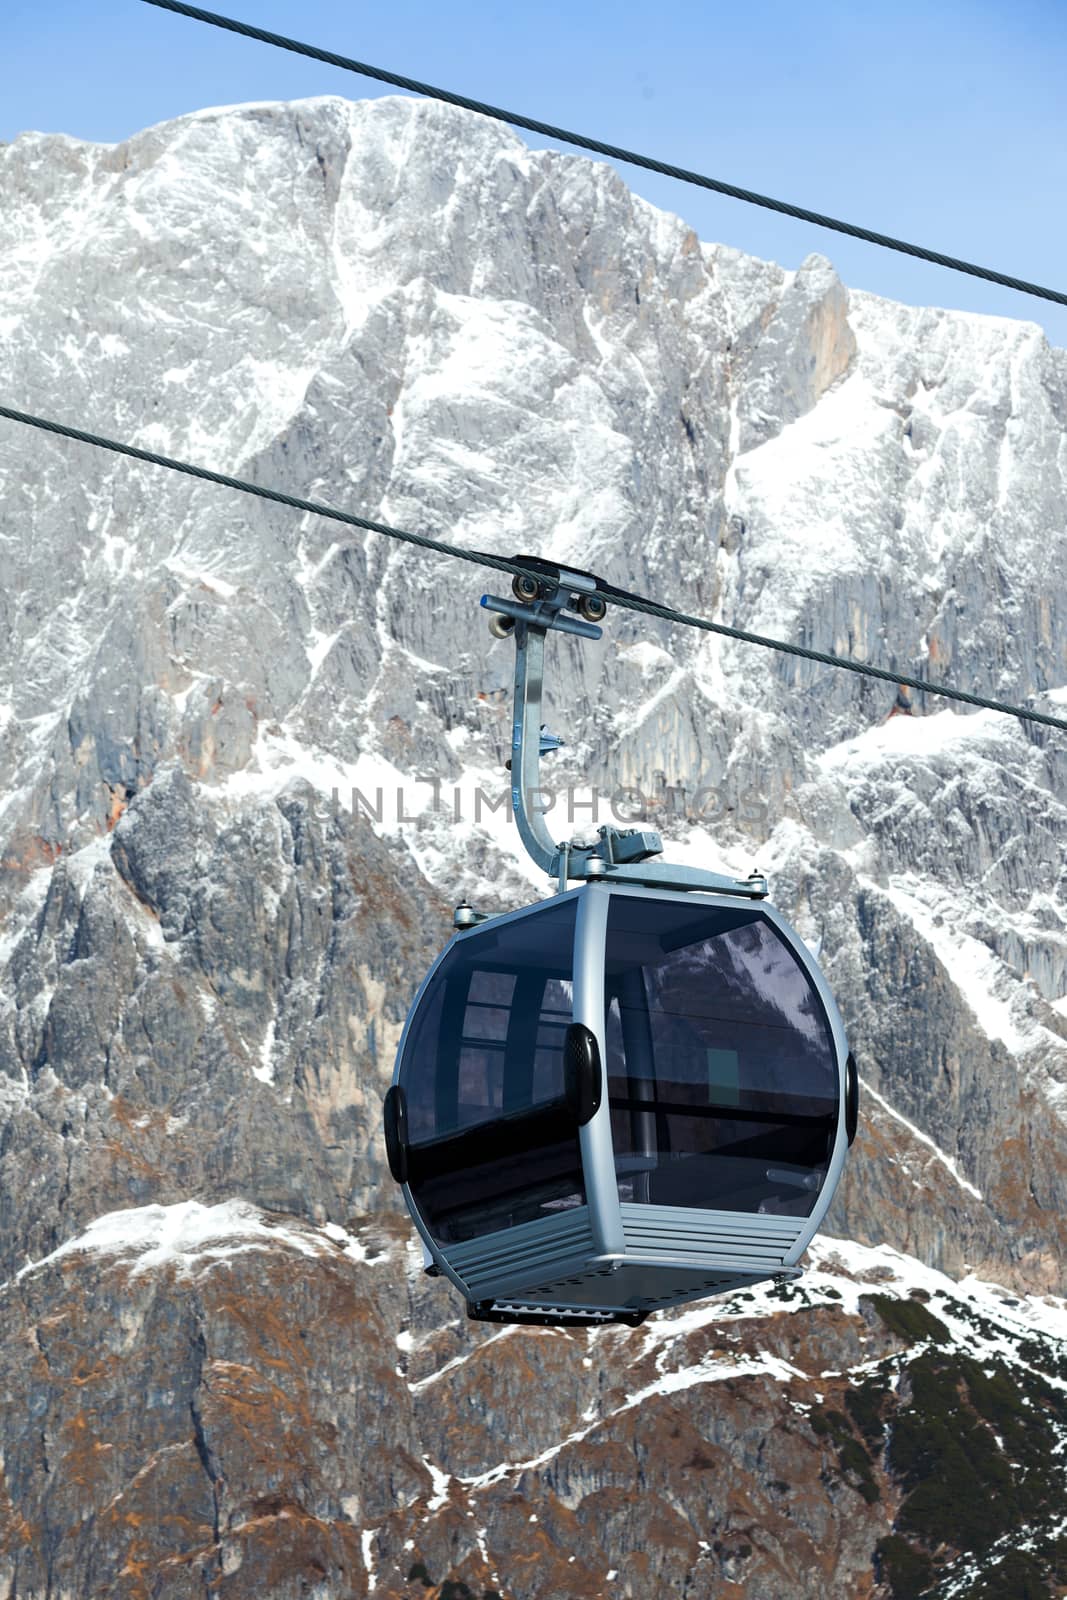 Cable car on the ski resort in Austria.